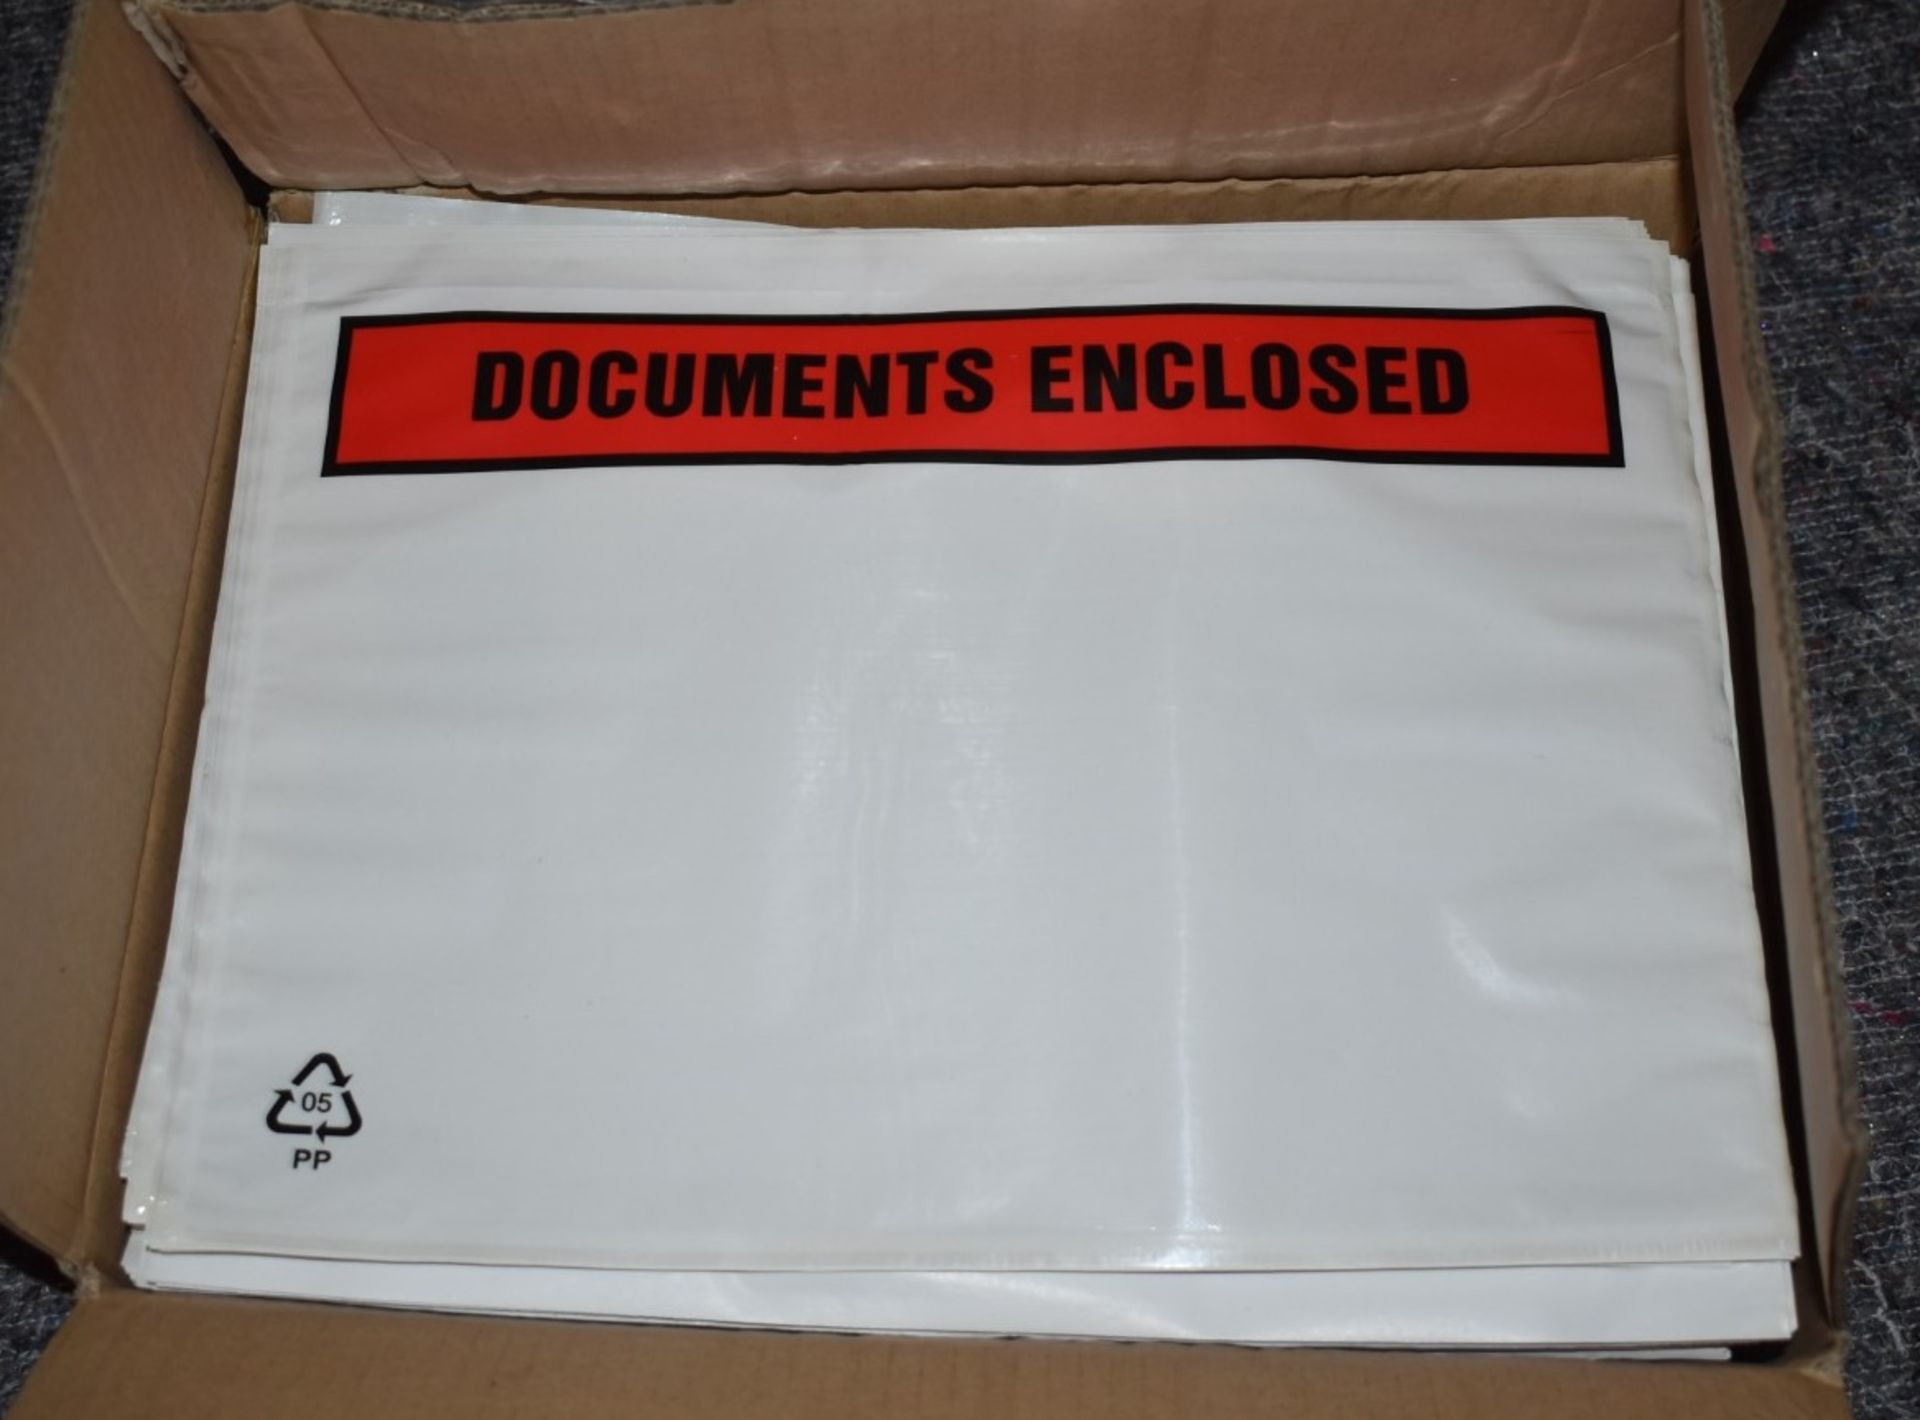 Approx 500 x A4 Printed Documents Enclosed Wallets - Ref: In2138 wh1 pal1 - CL011 - Location: